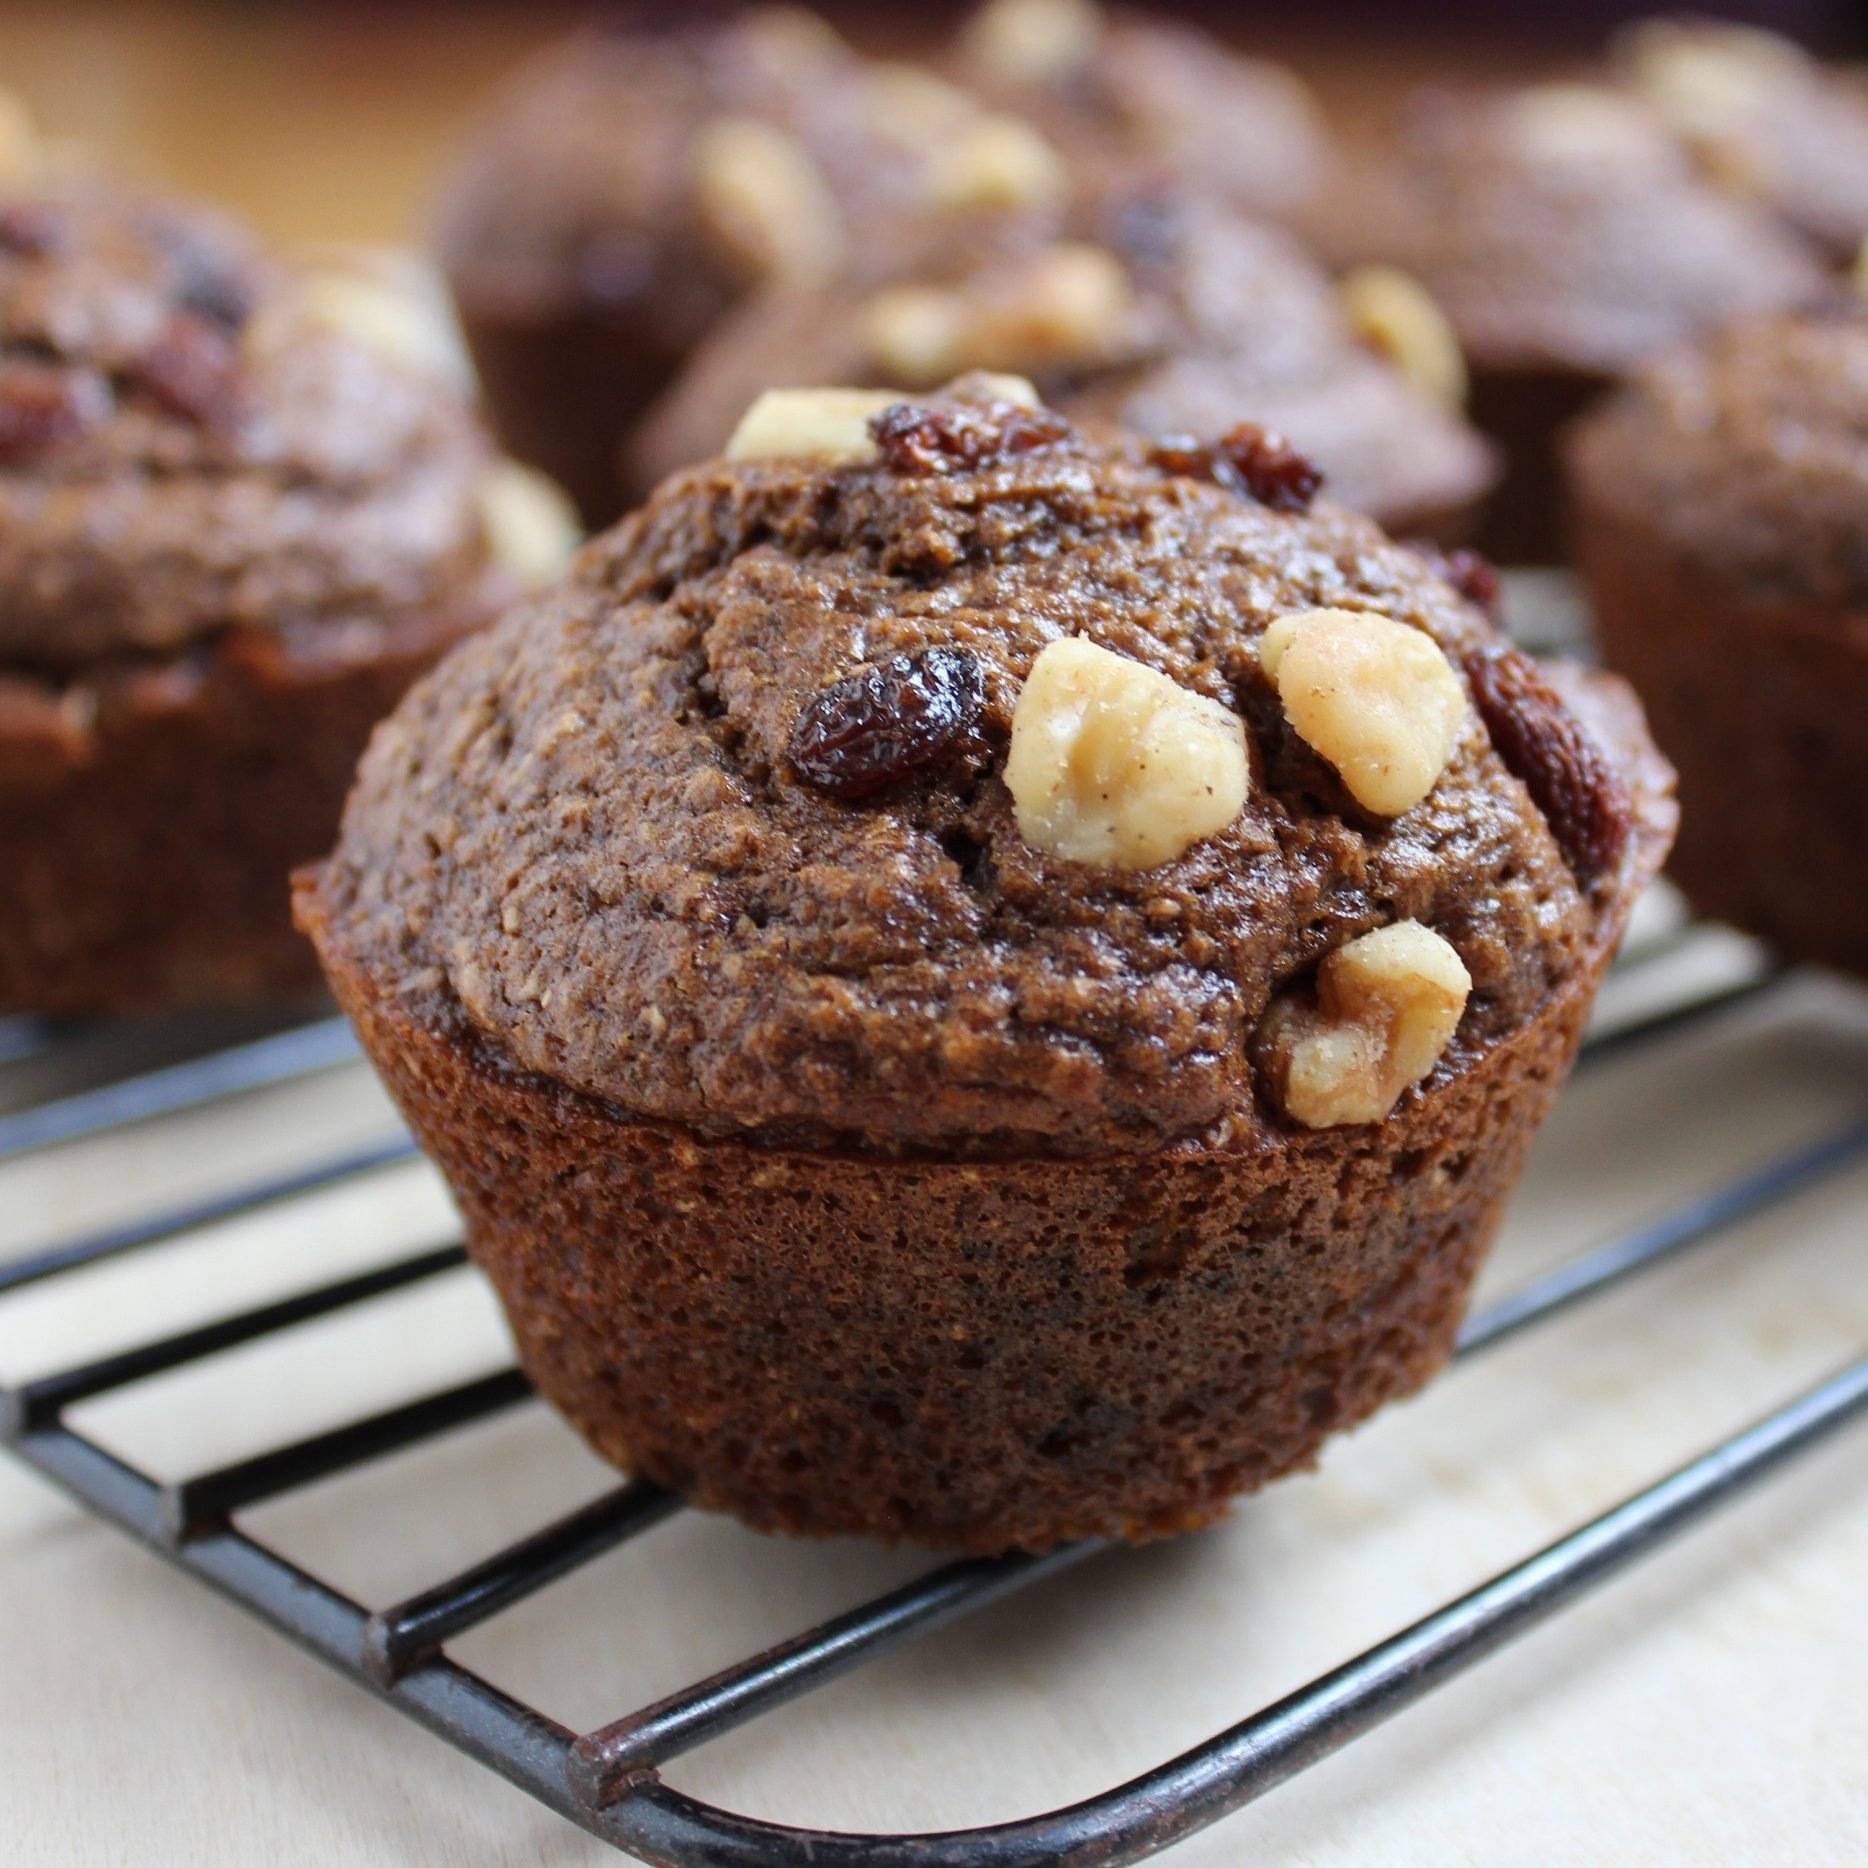 The Bran Muffin Recipe this Nutritionist Swears By